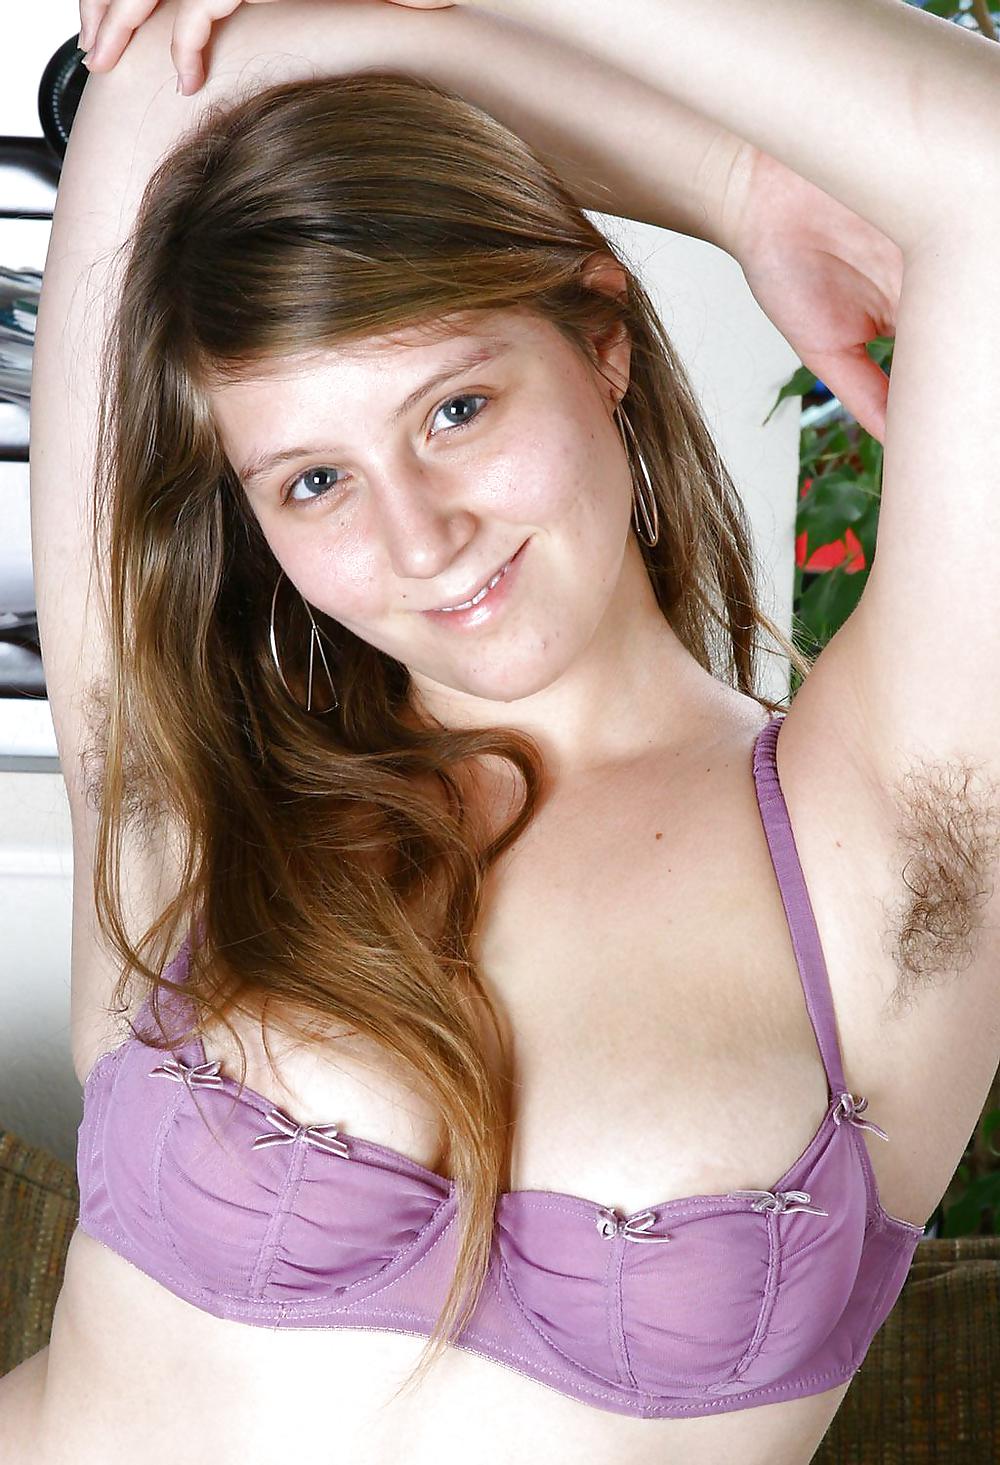 EVE - NICE, HAIRY & DELICIOUS V #1121049